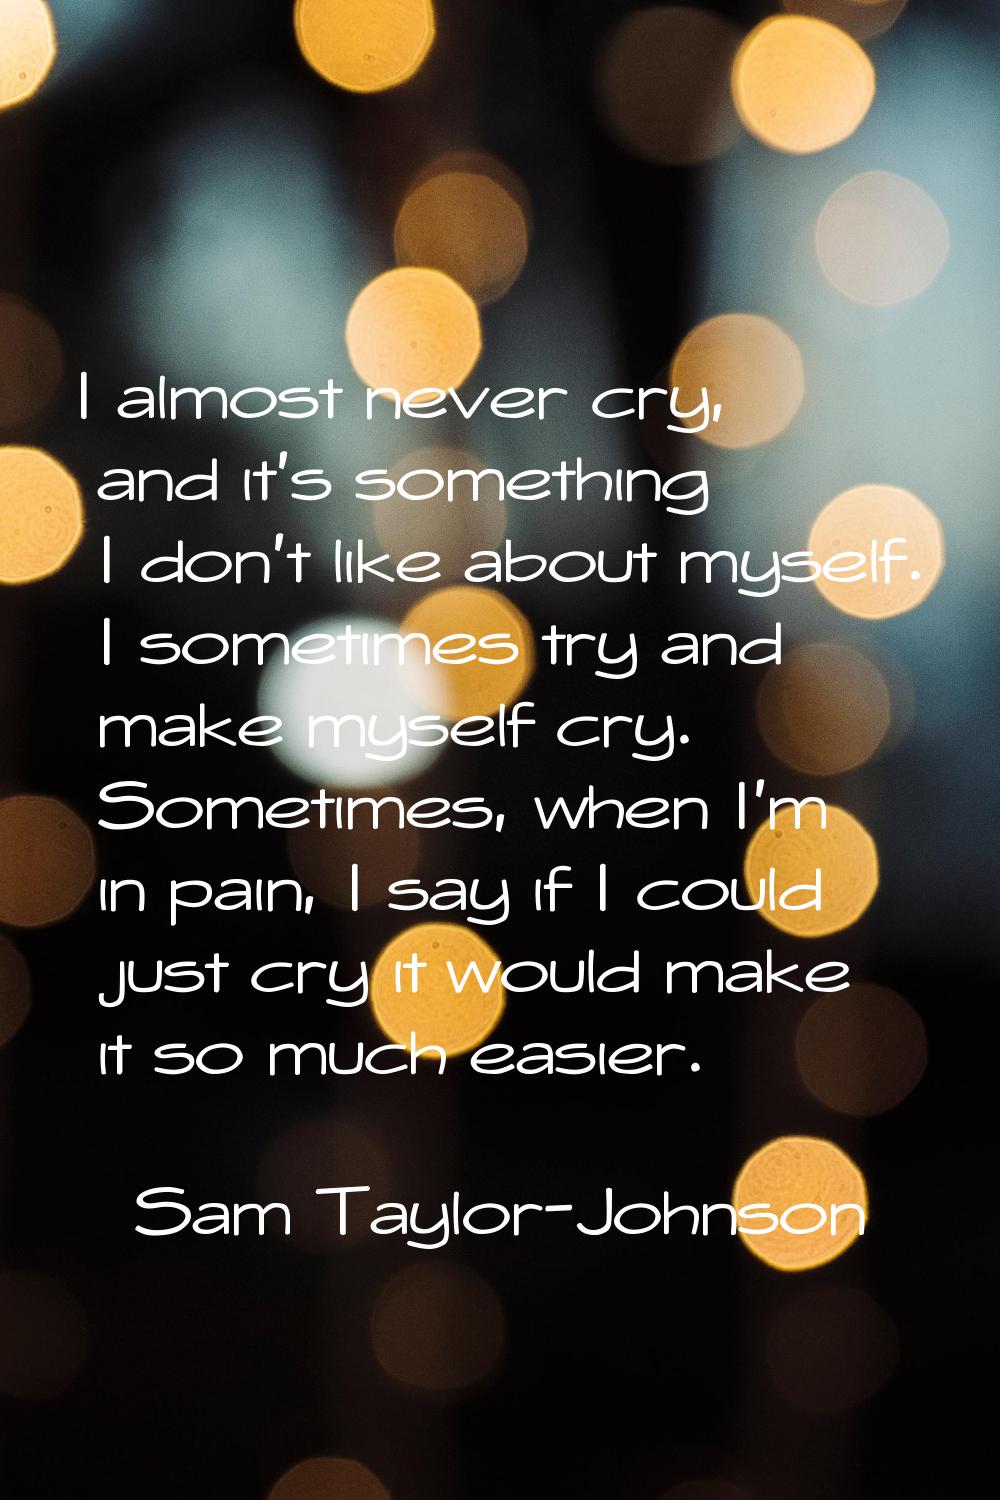 I almost never cry, and it's something I don't like about myself. I sometimes try and make myself c